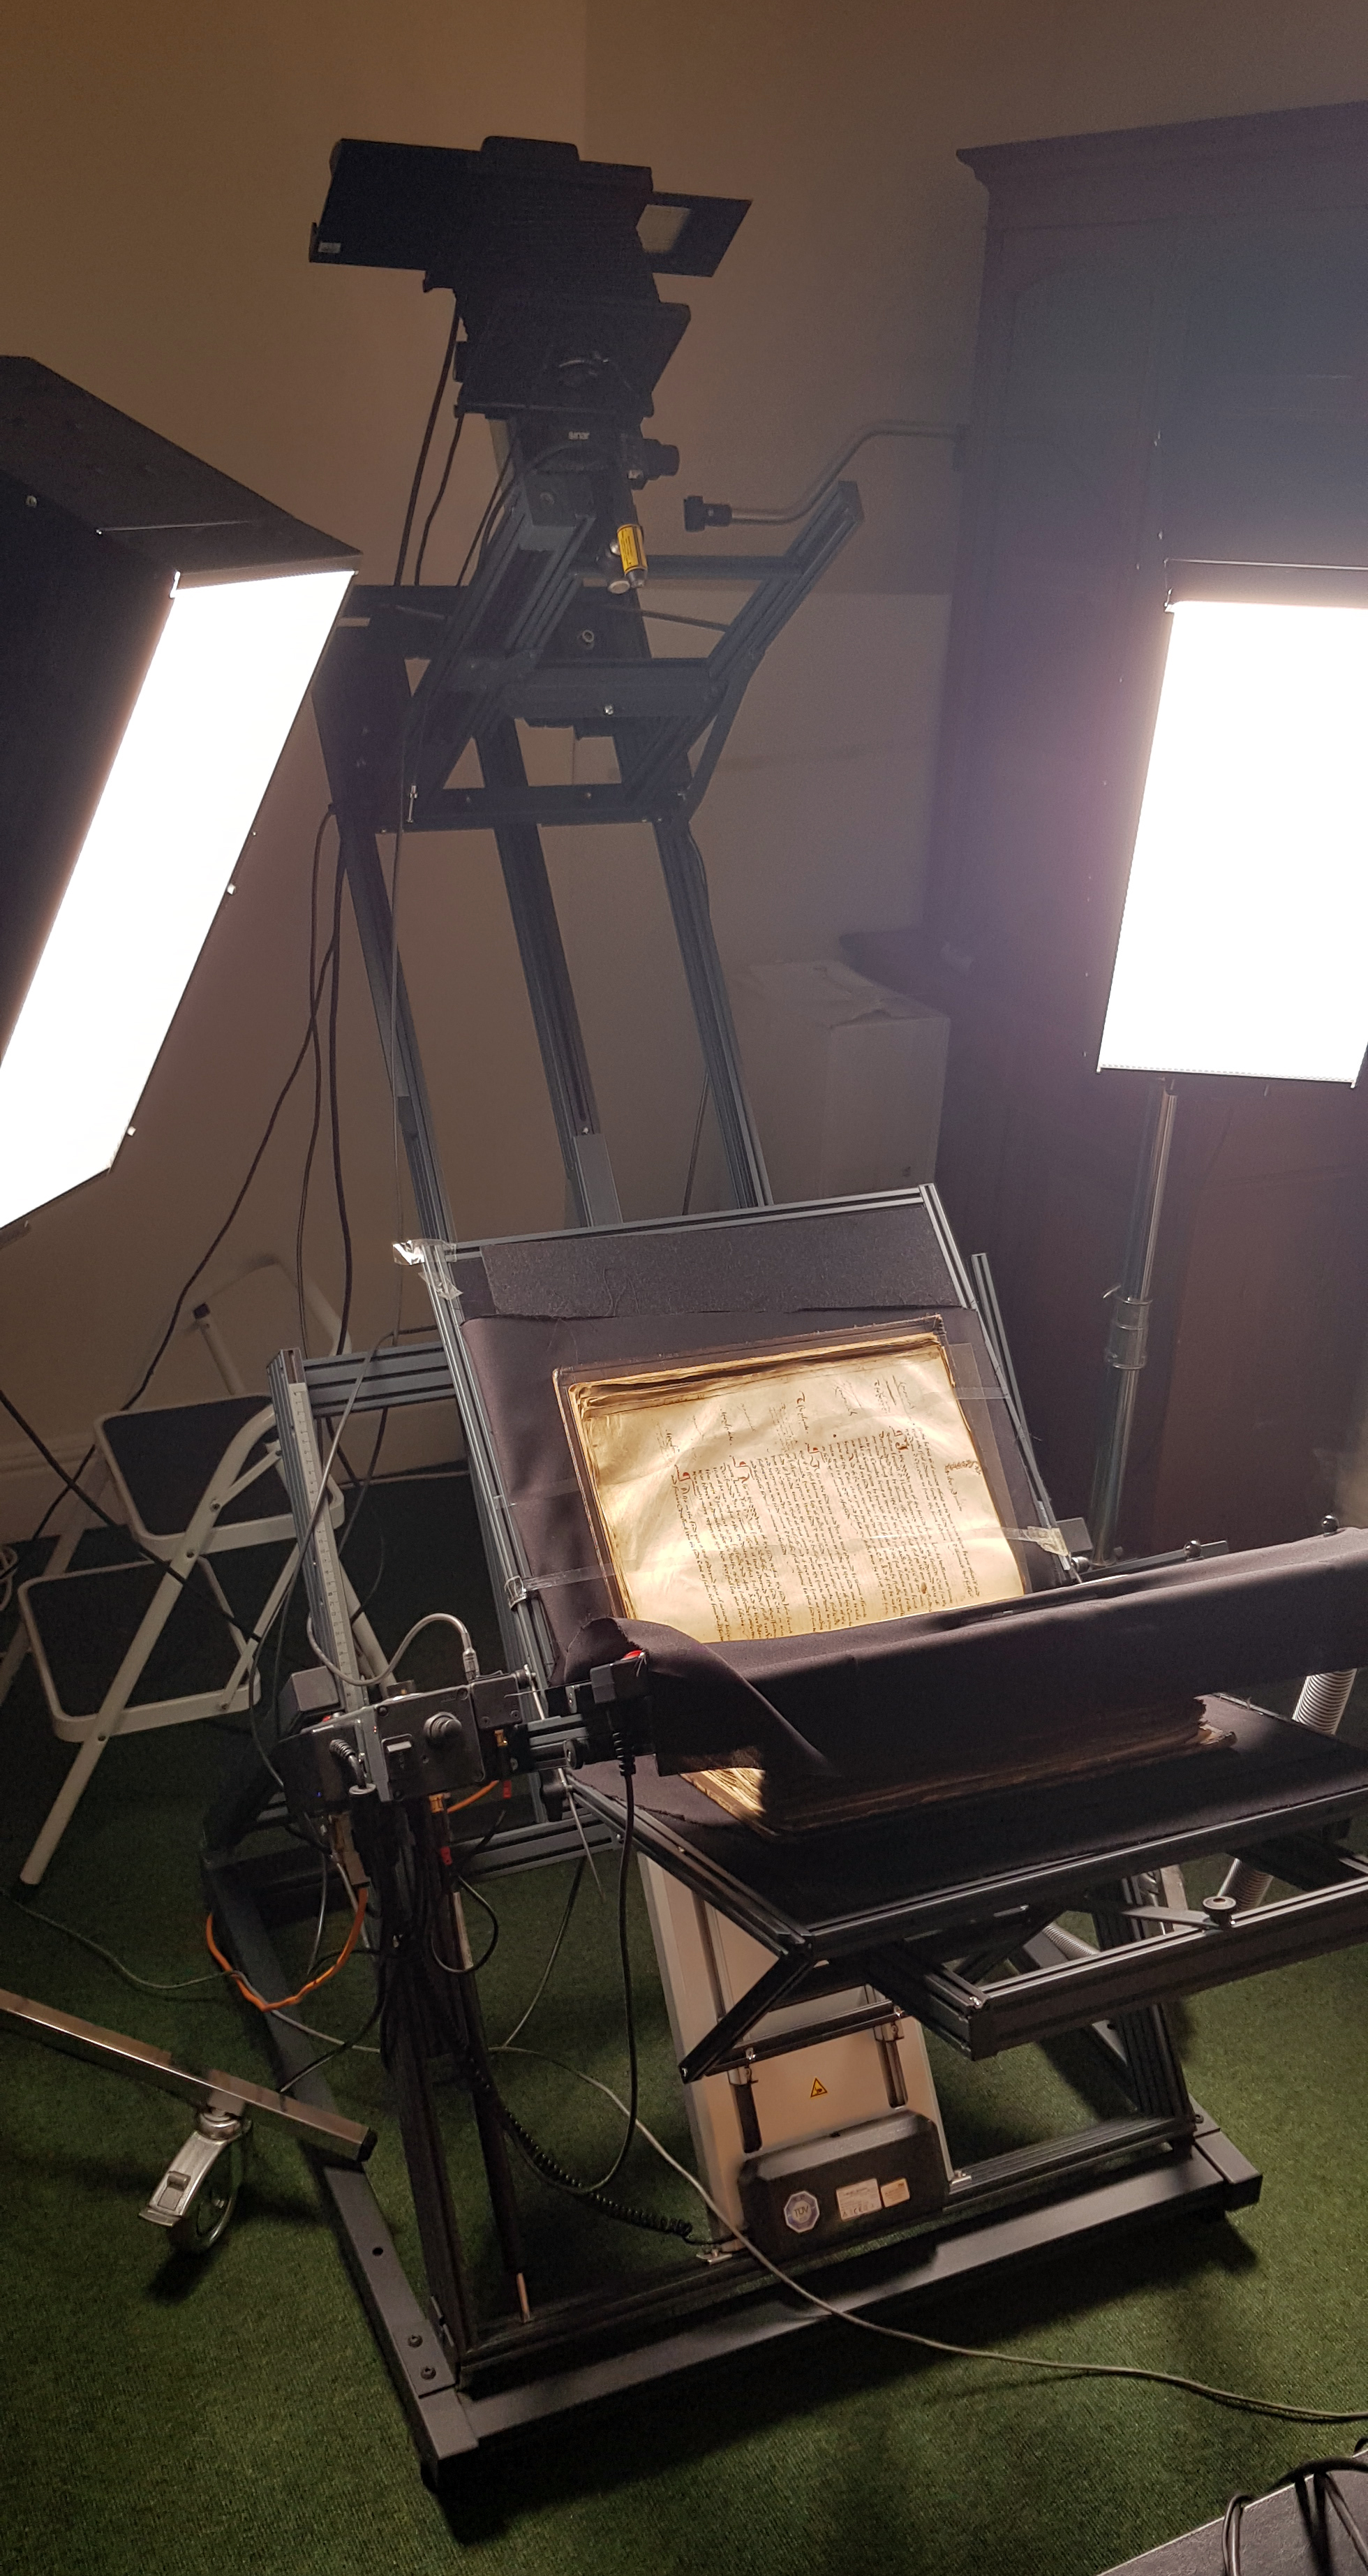 Grazer conservation graded book cradle with manuscript in place and lights